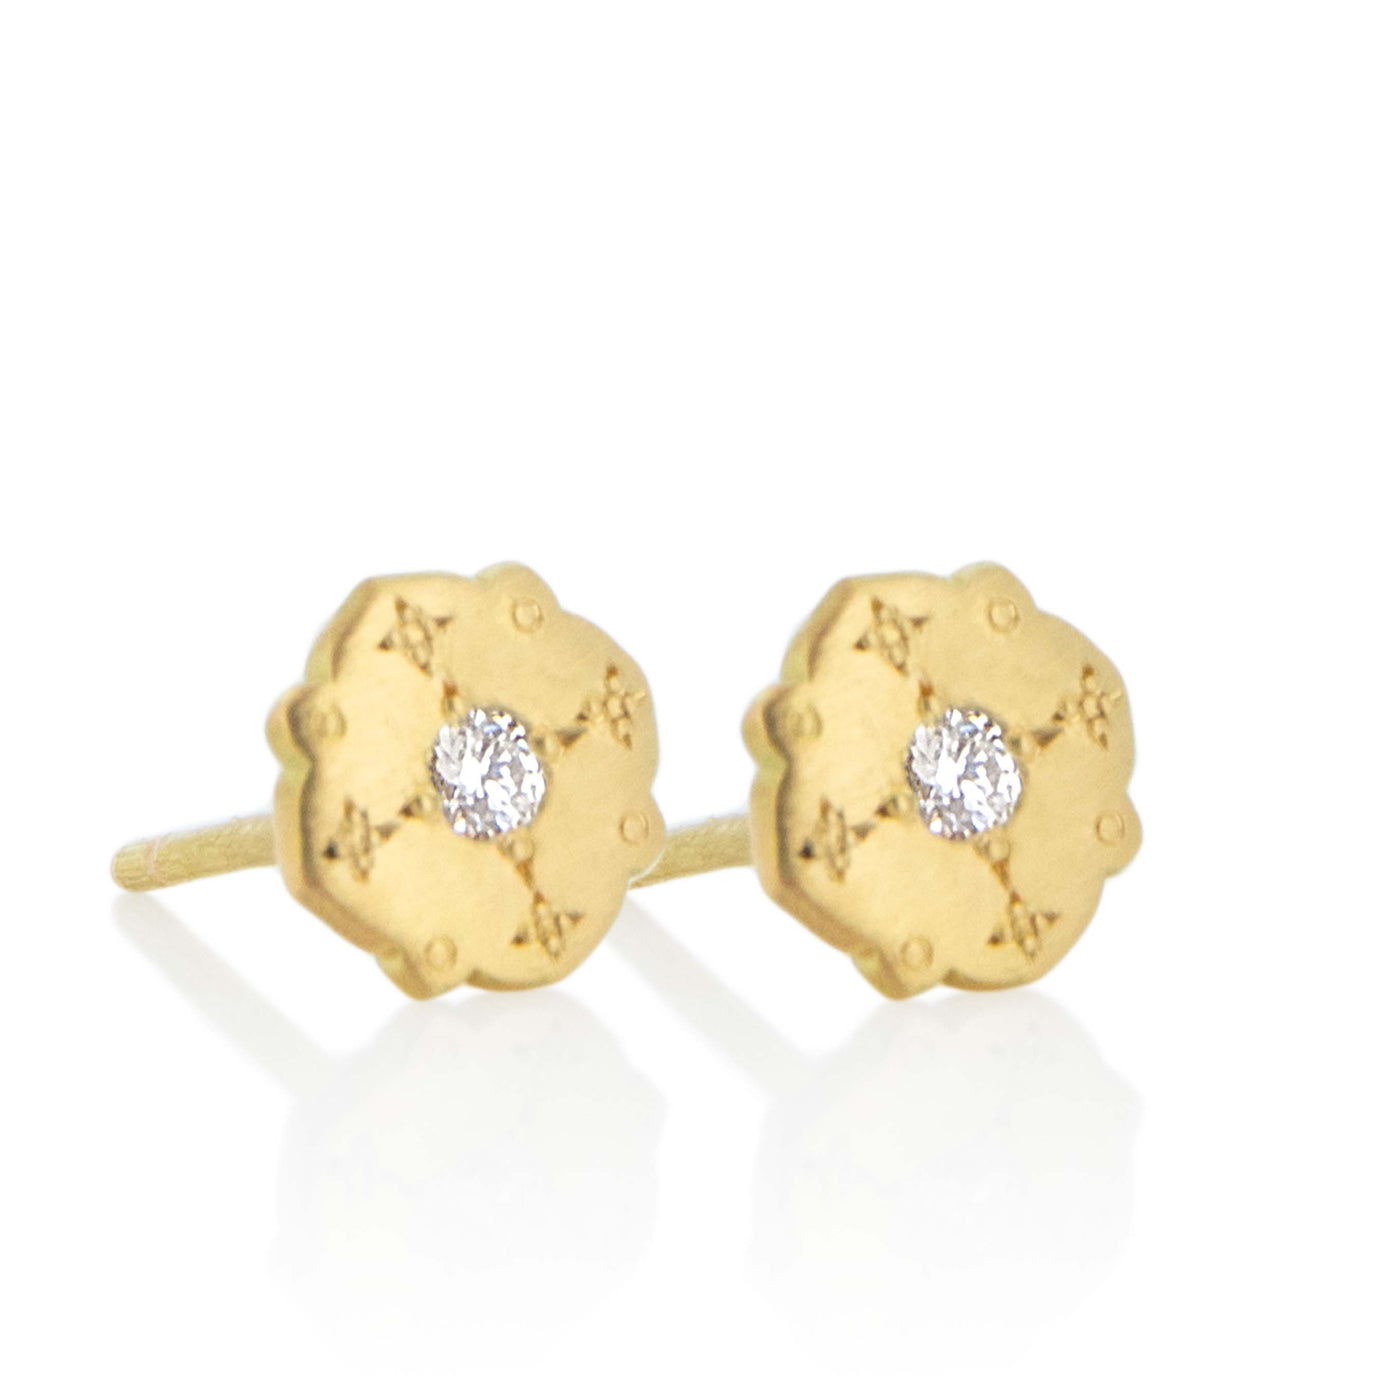 Drops of Happiness Kite Studs